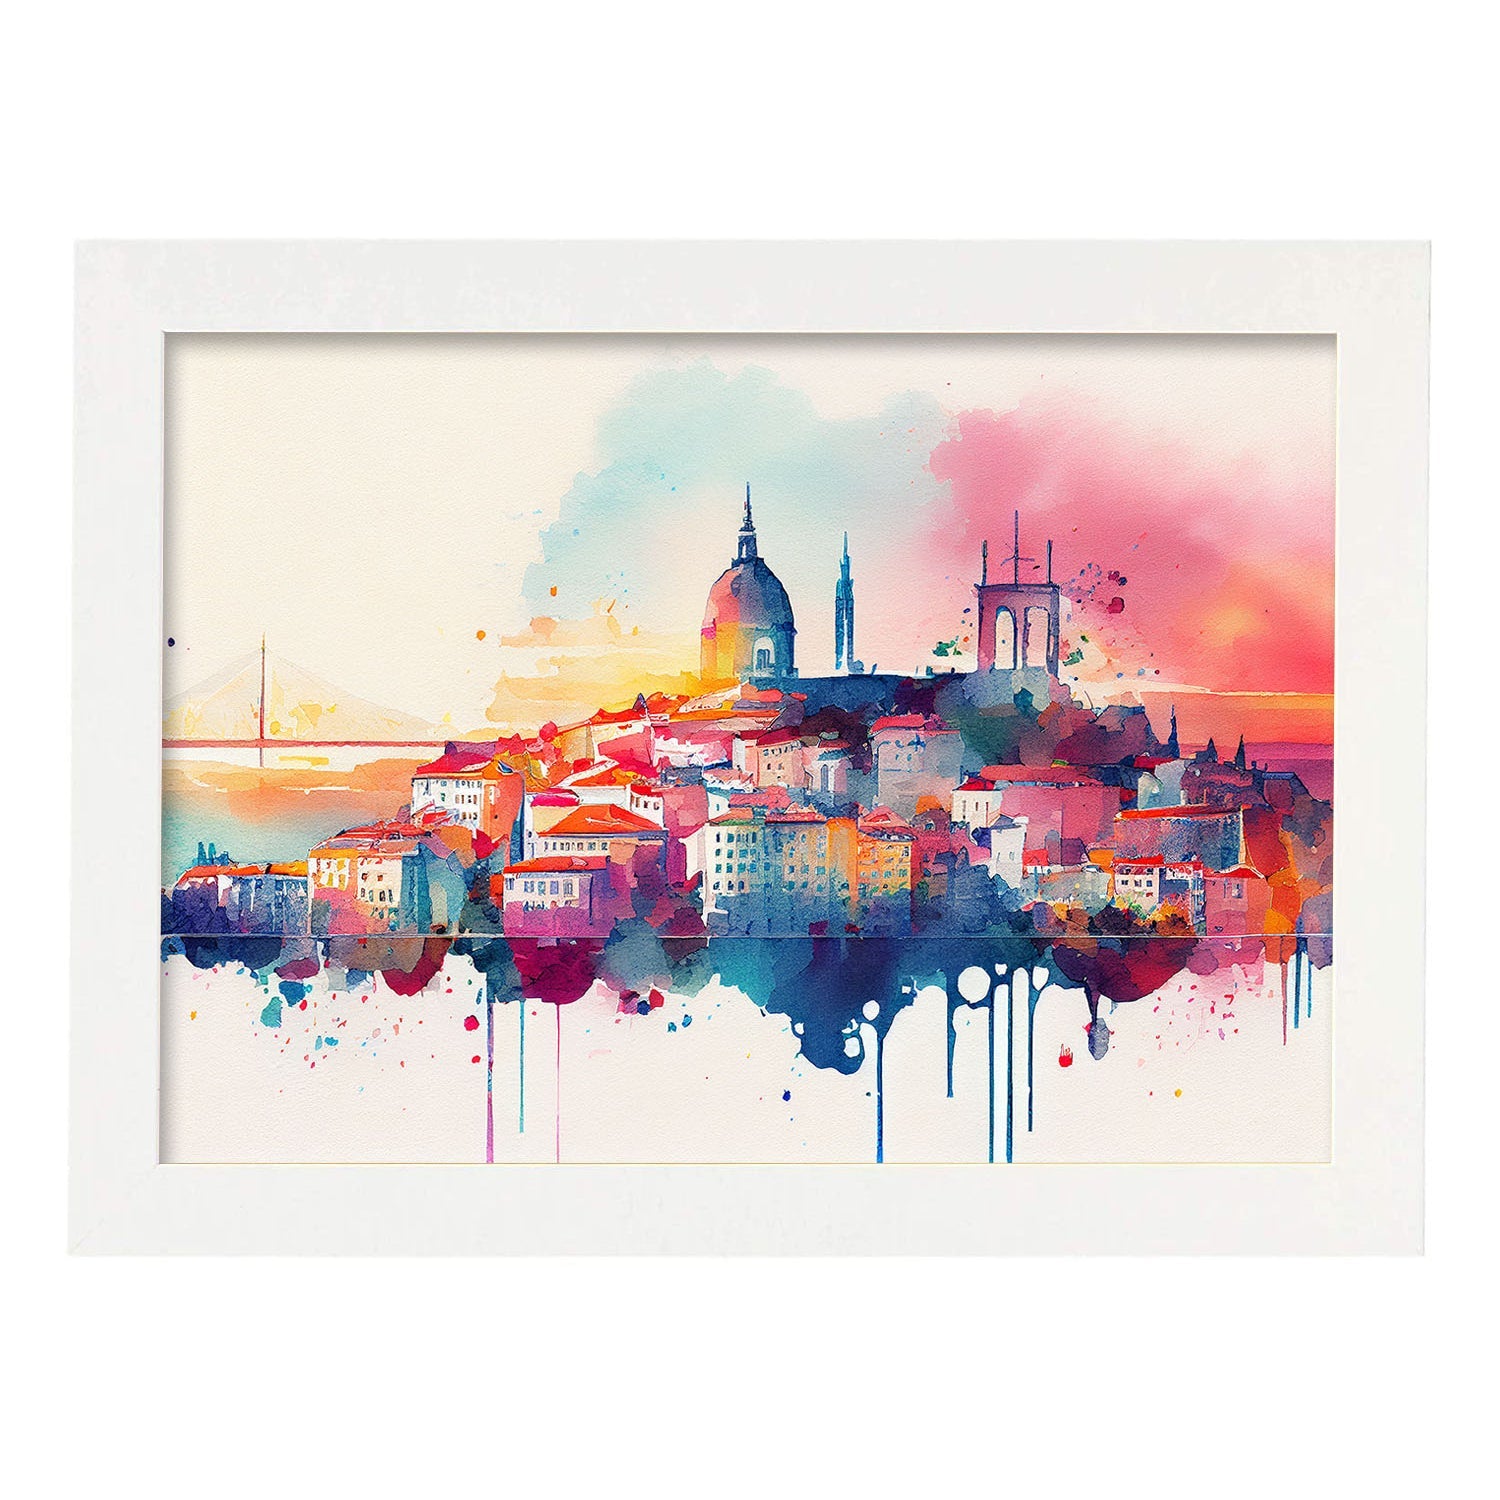 Nacnic watercolor of a skyline of the city of Lisbon_2. Aesthetic Wall Art Prints for Bedroom or Living Room Design.-Artwork-Nacnic-A4-Marco Blanco-Nacnic Estudio SL